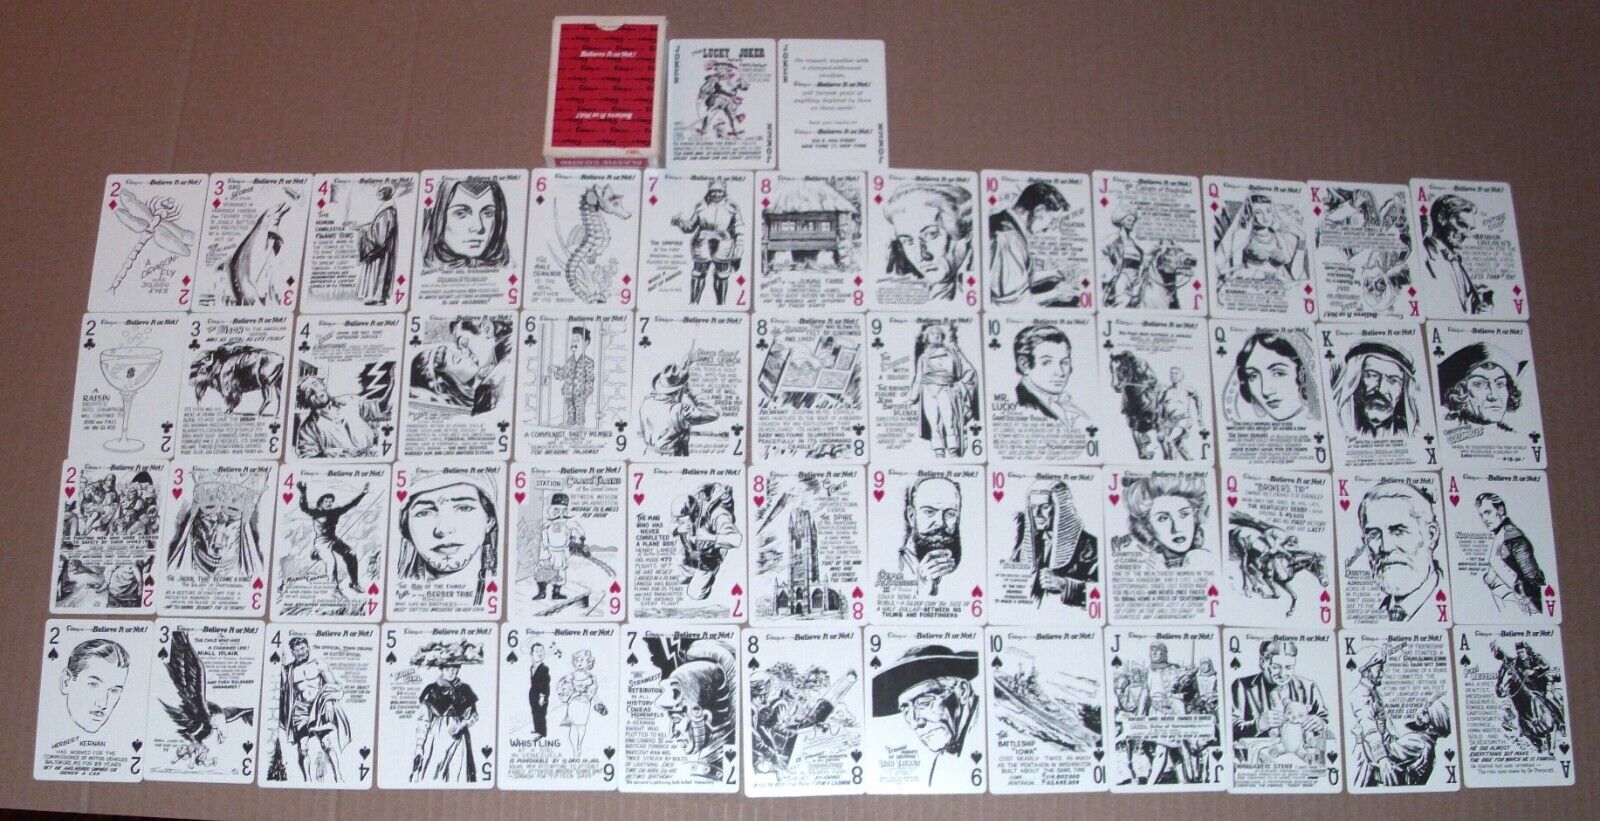 1960's STANCRAFT PRODUCTS RIPLEY'S BELIEVE IT OR NOT FULL 52 CARD DECK W/JOKERS